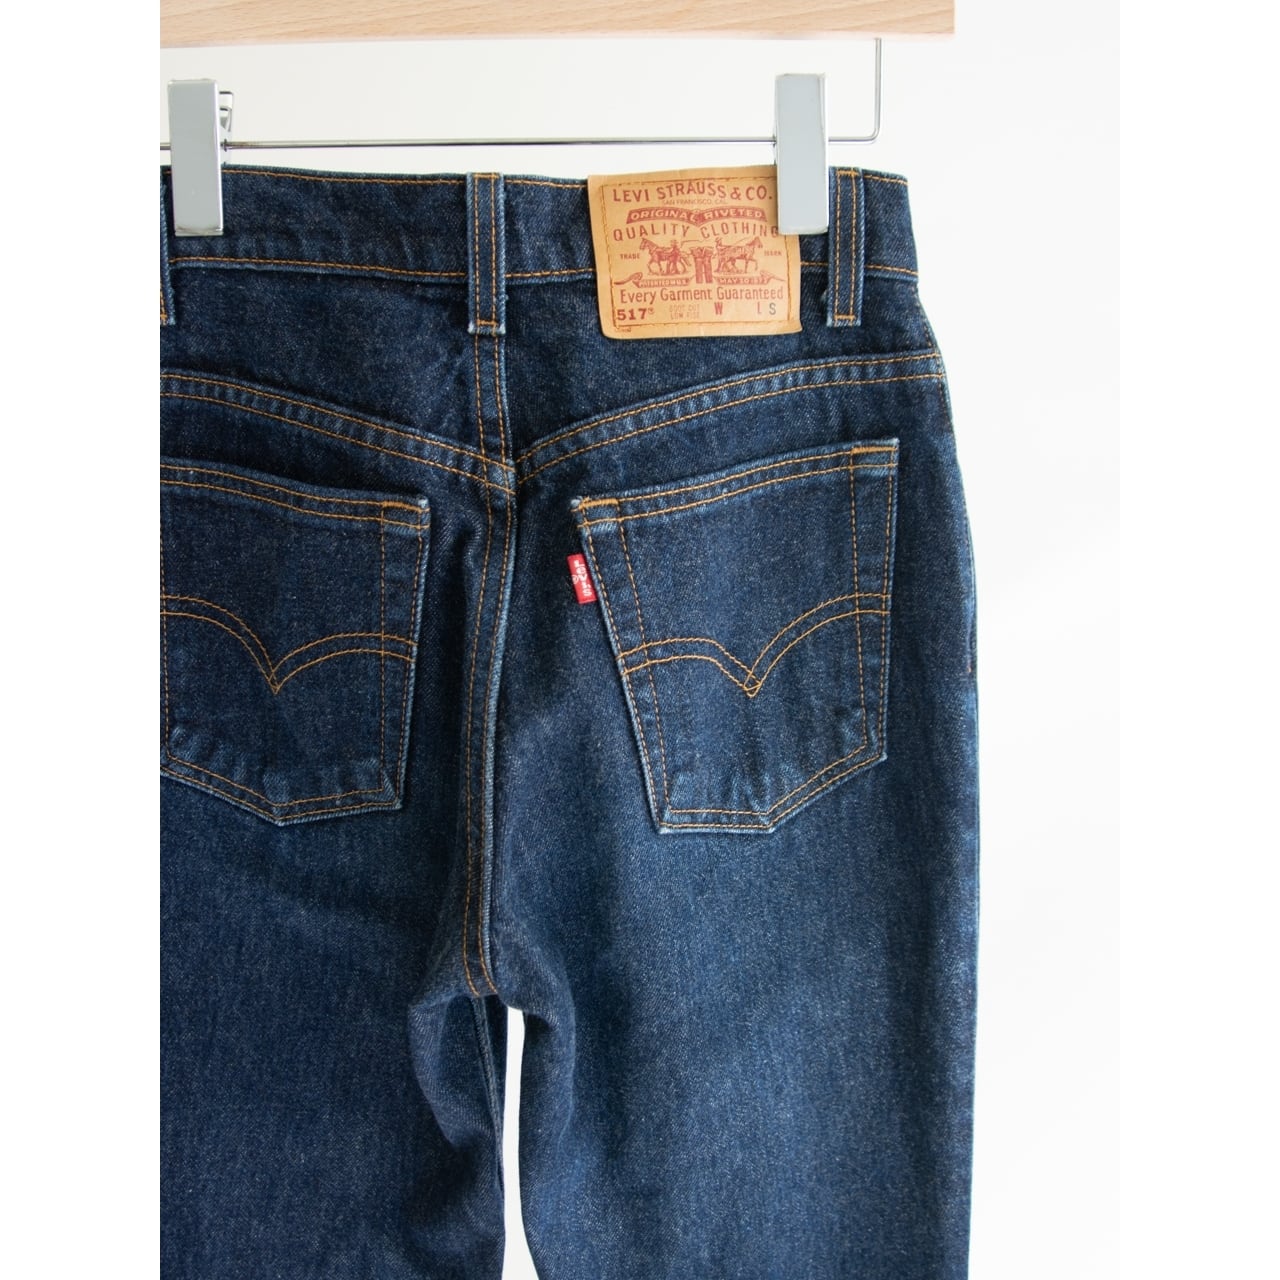 LEVI'S 517】Made in U.S.A. 90's 100% Cotton Boot Cut Low Rise ...